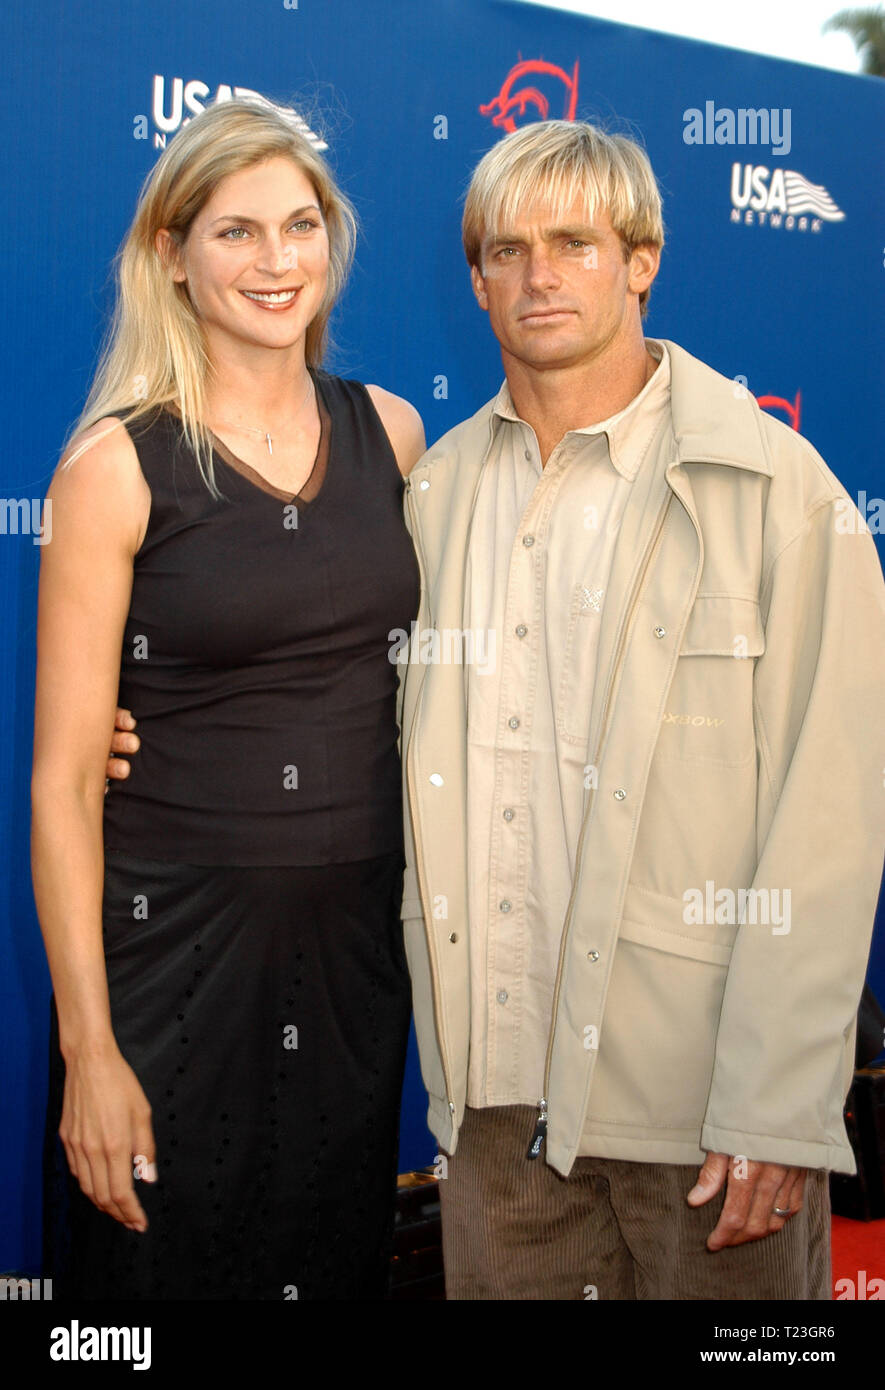 Gabrielle Reece and Laird Hamilton at The 3rd Annual World Stunt Awards, held at the Paramount Pictures Studios in Los Angeles, CA. The event took place on Sunday, June 1, 2003.  Photo Credit: Sthanlee B. Mirador/ PictureLux Stock Photo